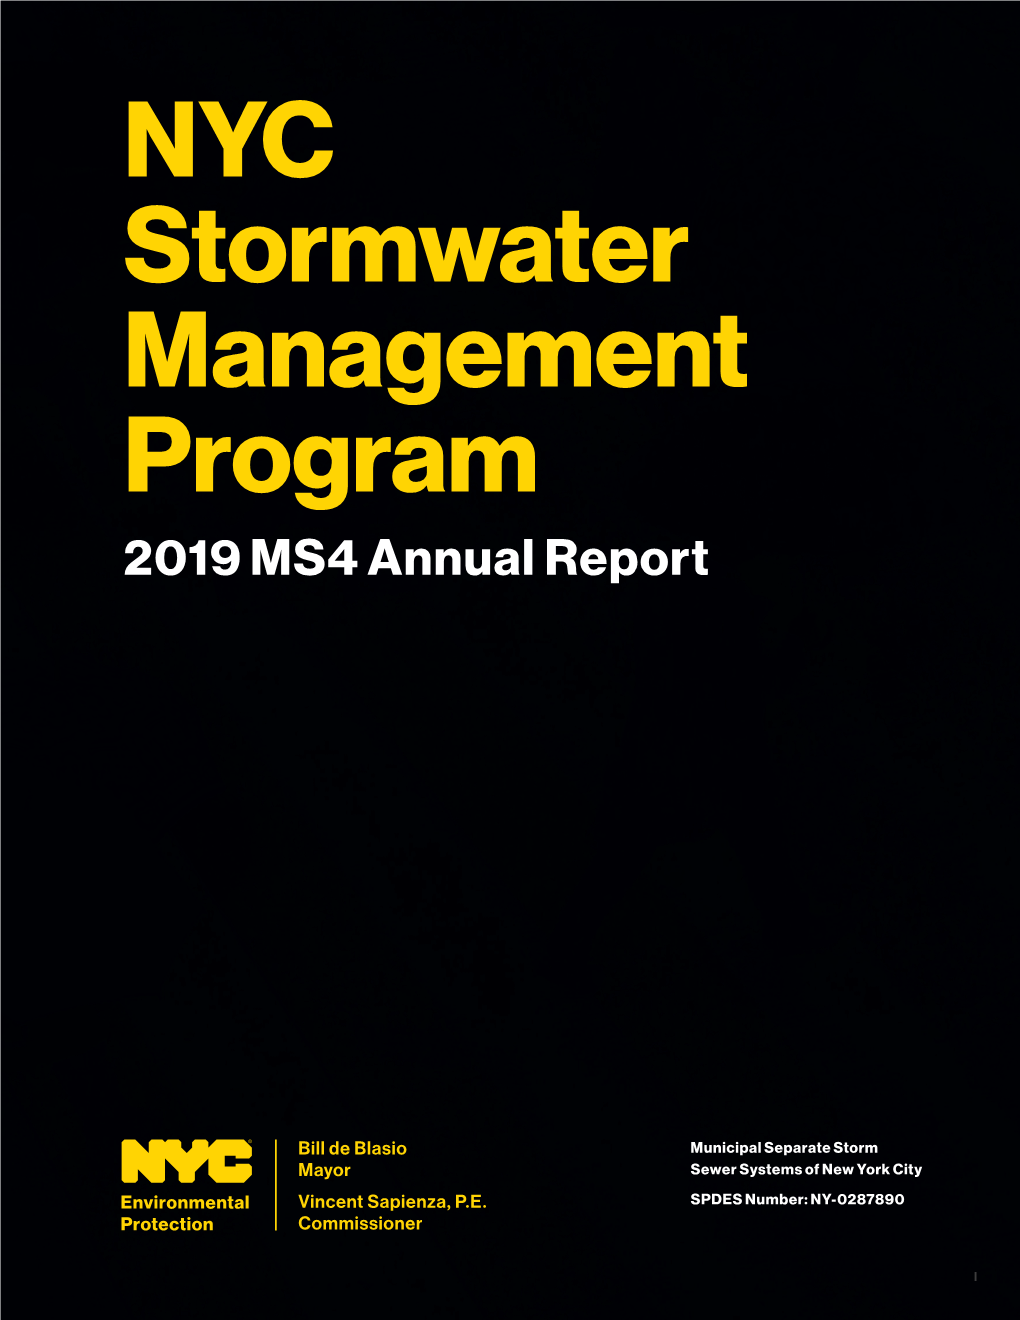 NYC Stormwater Management Program 2019 MS4 Annual Report